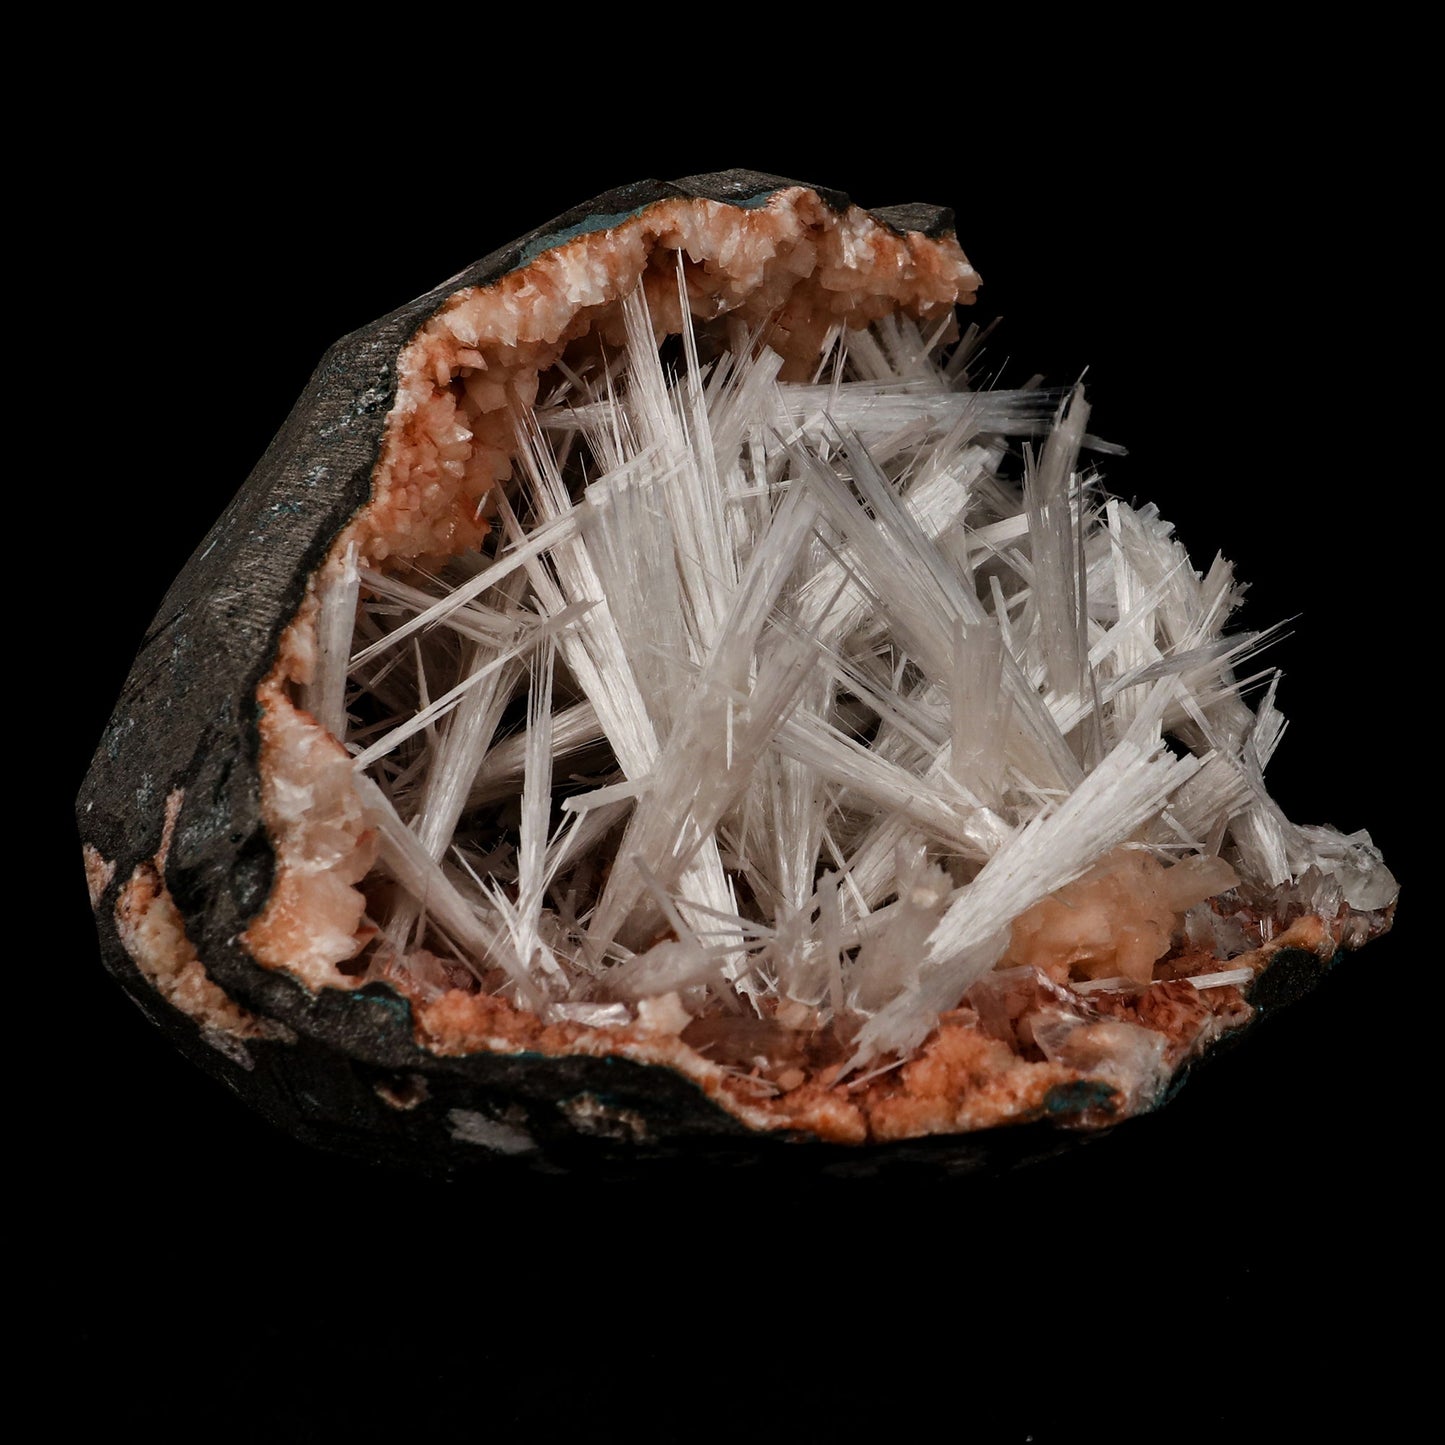 Scolecite Sprays Inside Heulandite Geode Natural Mineral Specimen # B…  https://www.superbminerals.us/products/scolecite-sprays-inside-heulandite-geode-natural-mineral-specimen-b-5304  Features: A geode with beige Heulandite crystals and a radial spray of glossy, colourless, ultra-transparent, needle-like Scolecite crystals, as well as numerous solitary crystals of Scolecite. It is nothing short of breathtaking - the crystal structure, luster, contrast, and symmetry are all perfect.